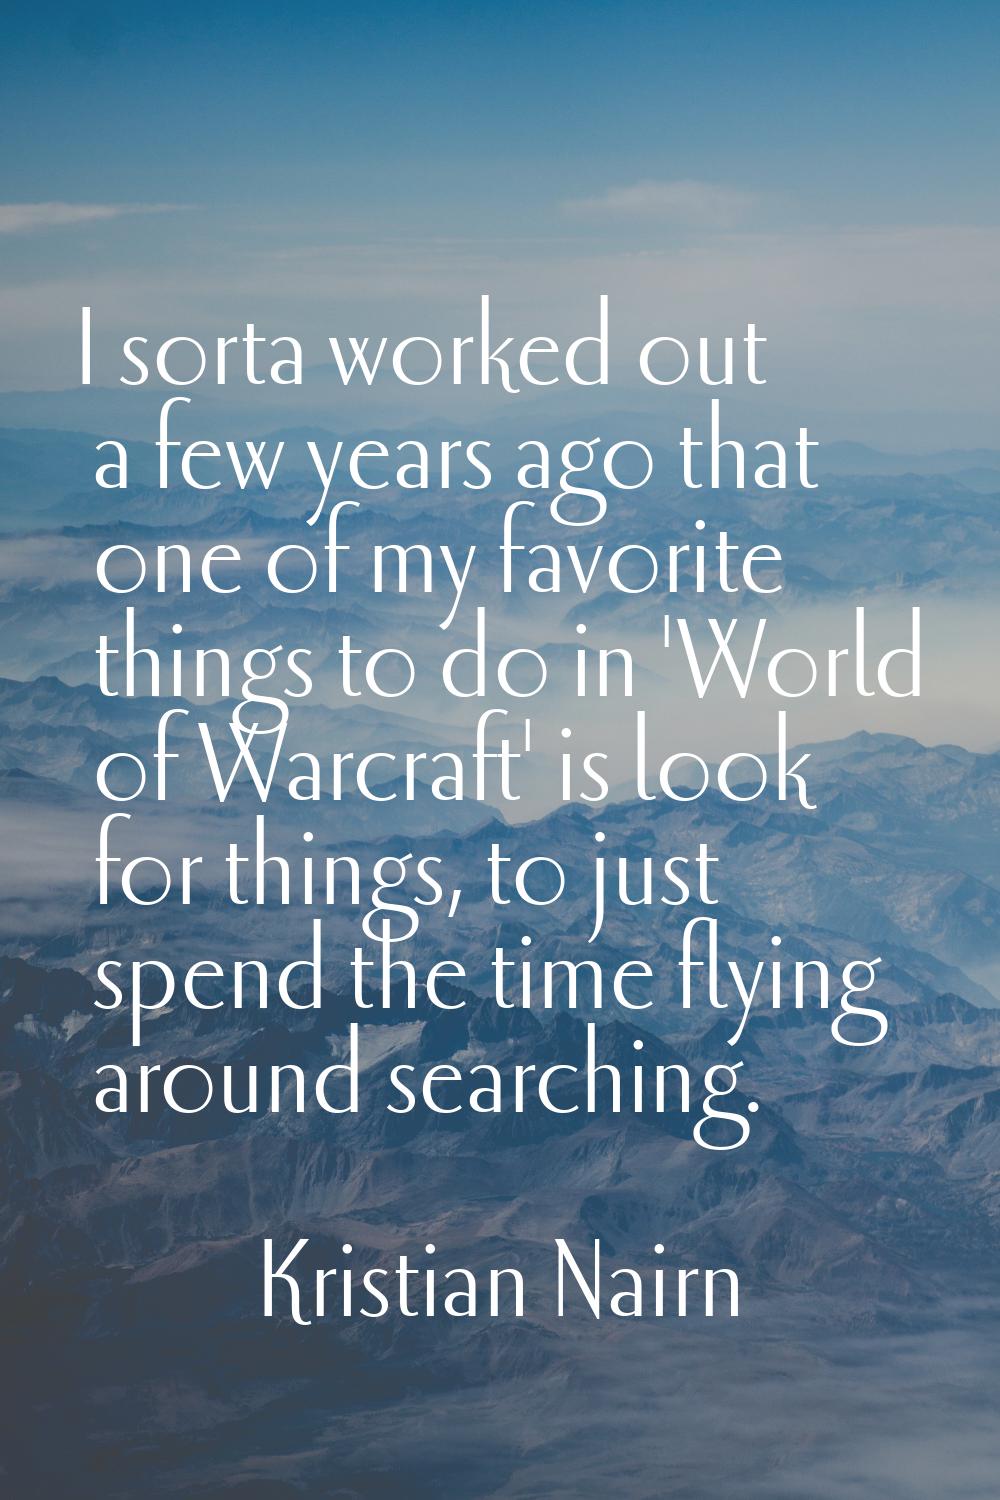 I sorta worked out a few years ago that one of my favorite things to do in 'World of Warcraft' is l